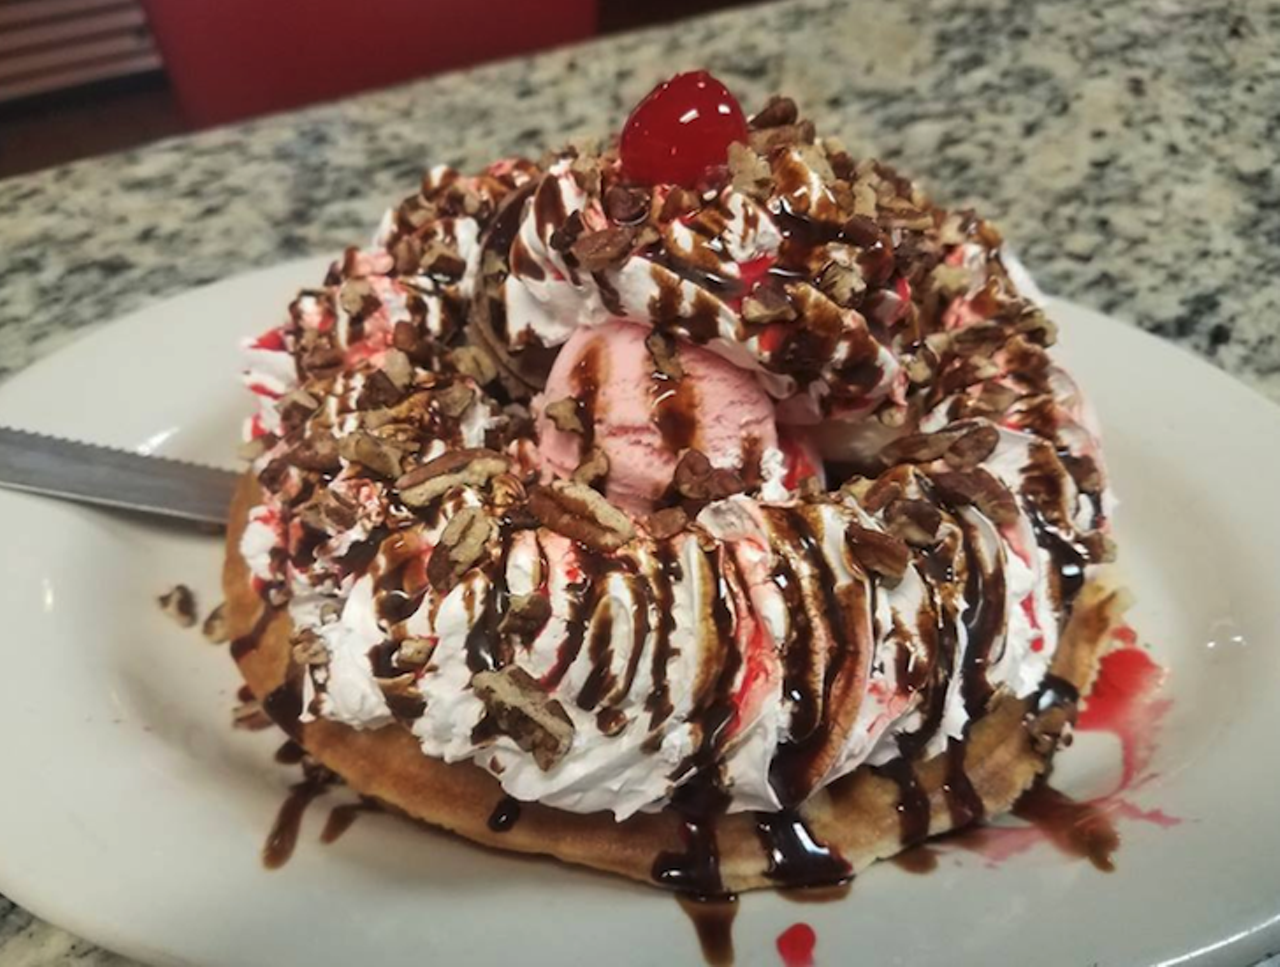 Three Coins Diner  
7410 N Nebraska Ave., Tampa, 813- 239-1256
Open 24 hours, with a typical diner menu offering a little bit of everything. A staple in Seminole Heights - Three Coins comes in clutch with their breakfast dishes. Did we mention waffle sundaes?
Photo via  Three Coins Diner /Facebook